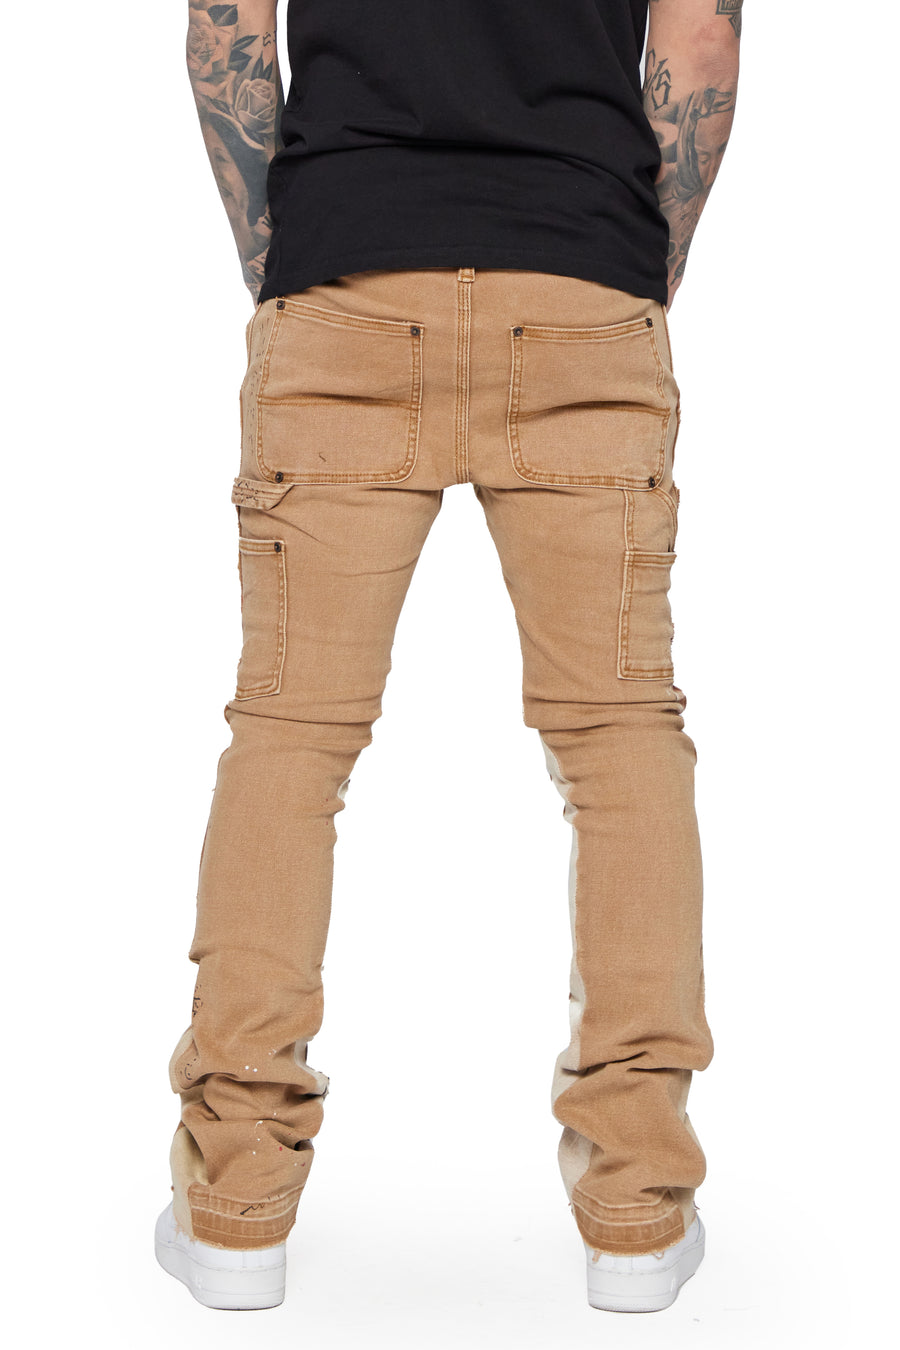 “ALPHA” CAHI STACKED FLARE JEAN